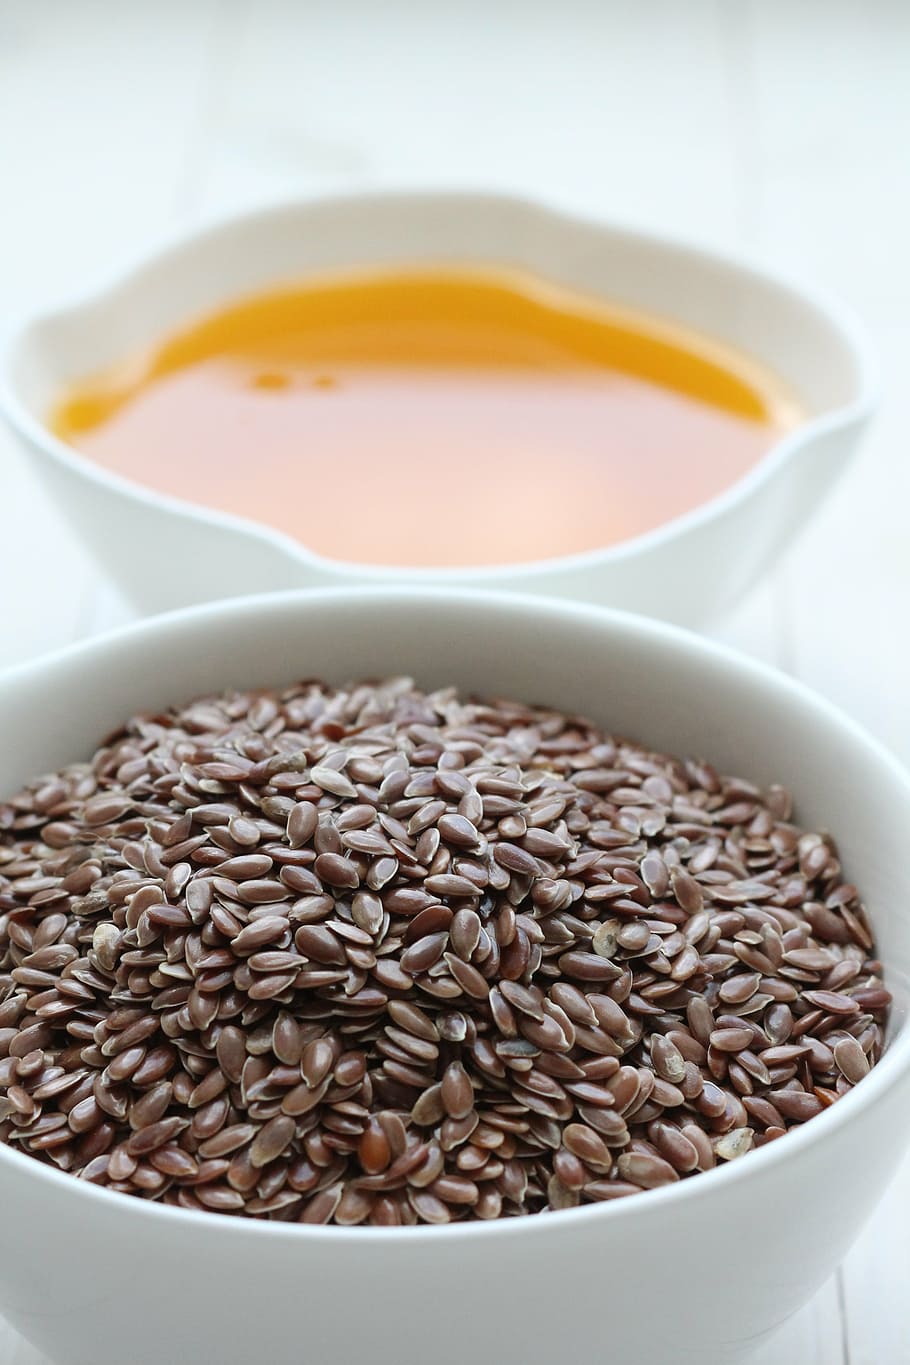 brown beans and orange liquid on white ceramic bowl, linseed, HD wallpaper